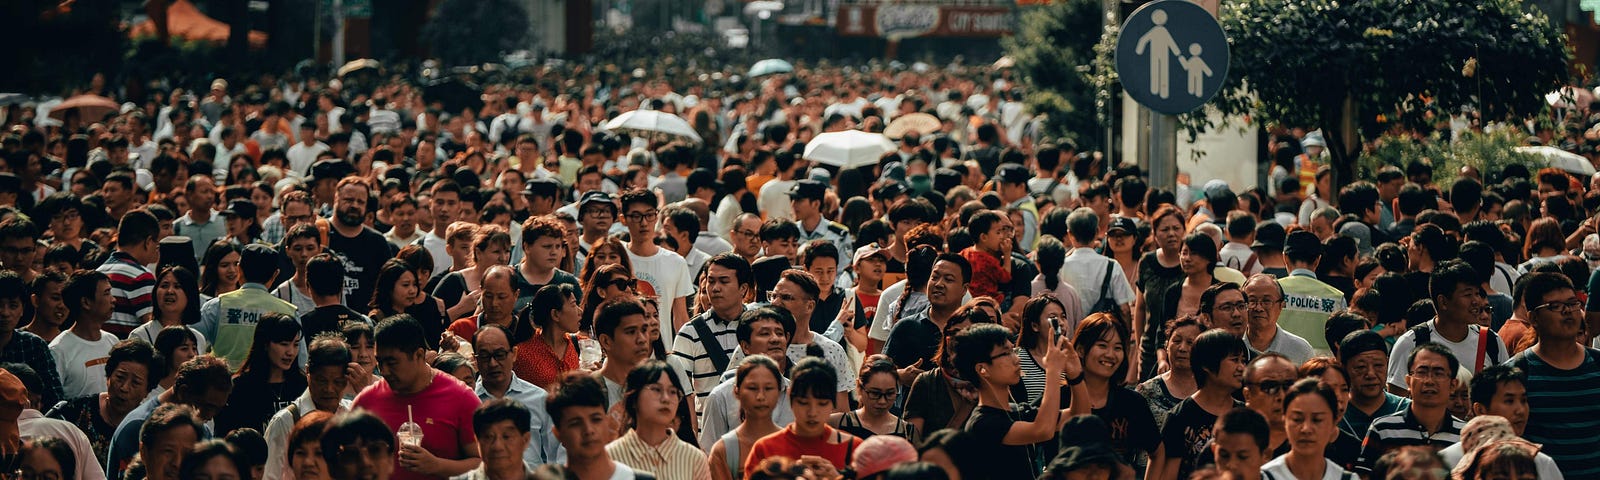 Crowd of people on a city street